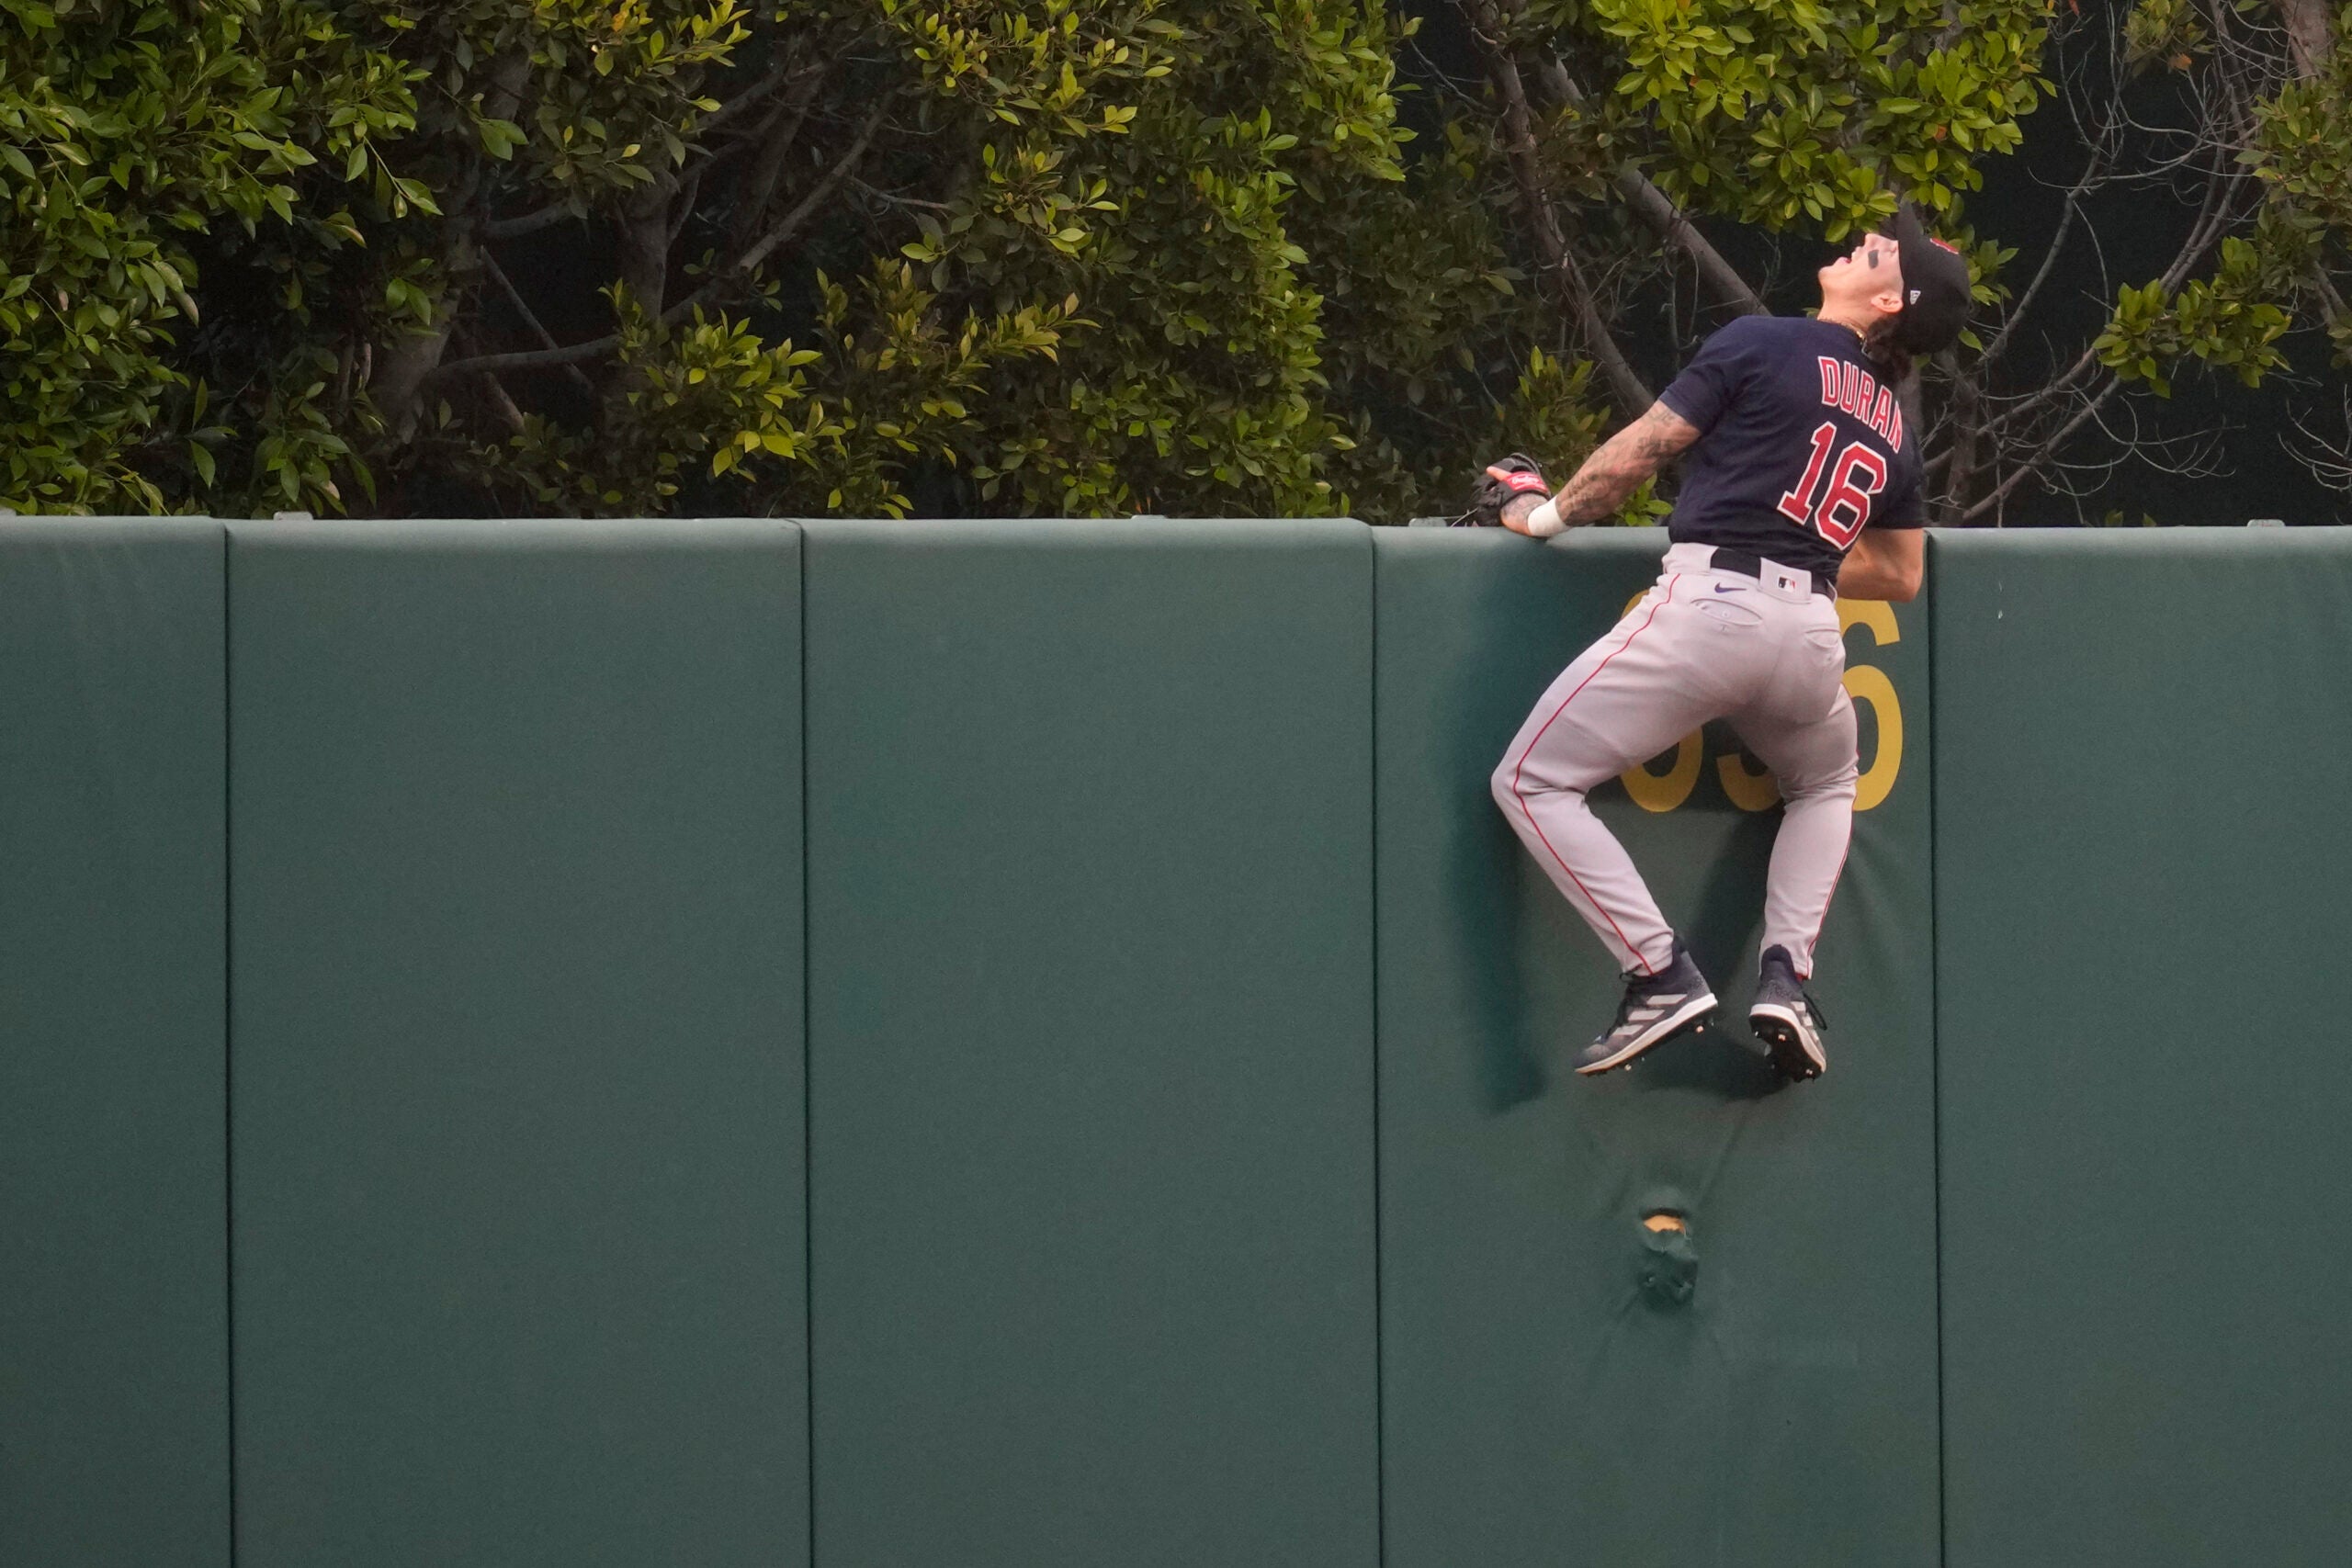 Red Sox center fielder Jarren Duran watches as a home run ball hit by the Angels' Mickey Moniak flies over the fence during the first inning.